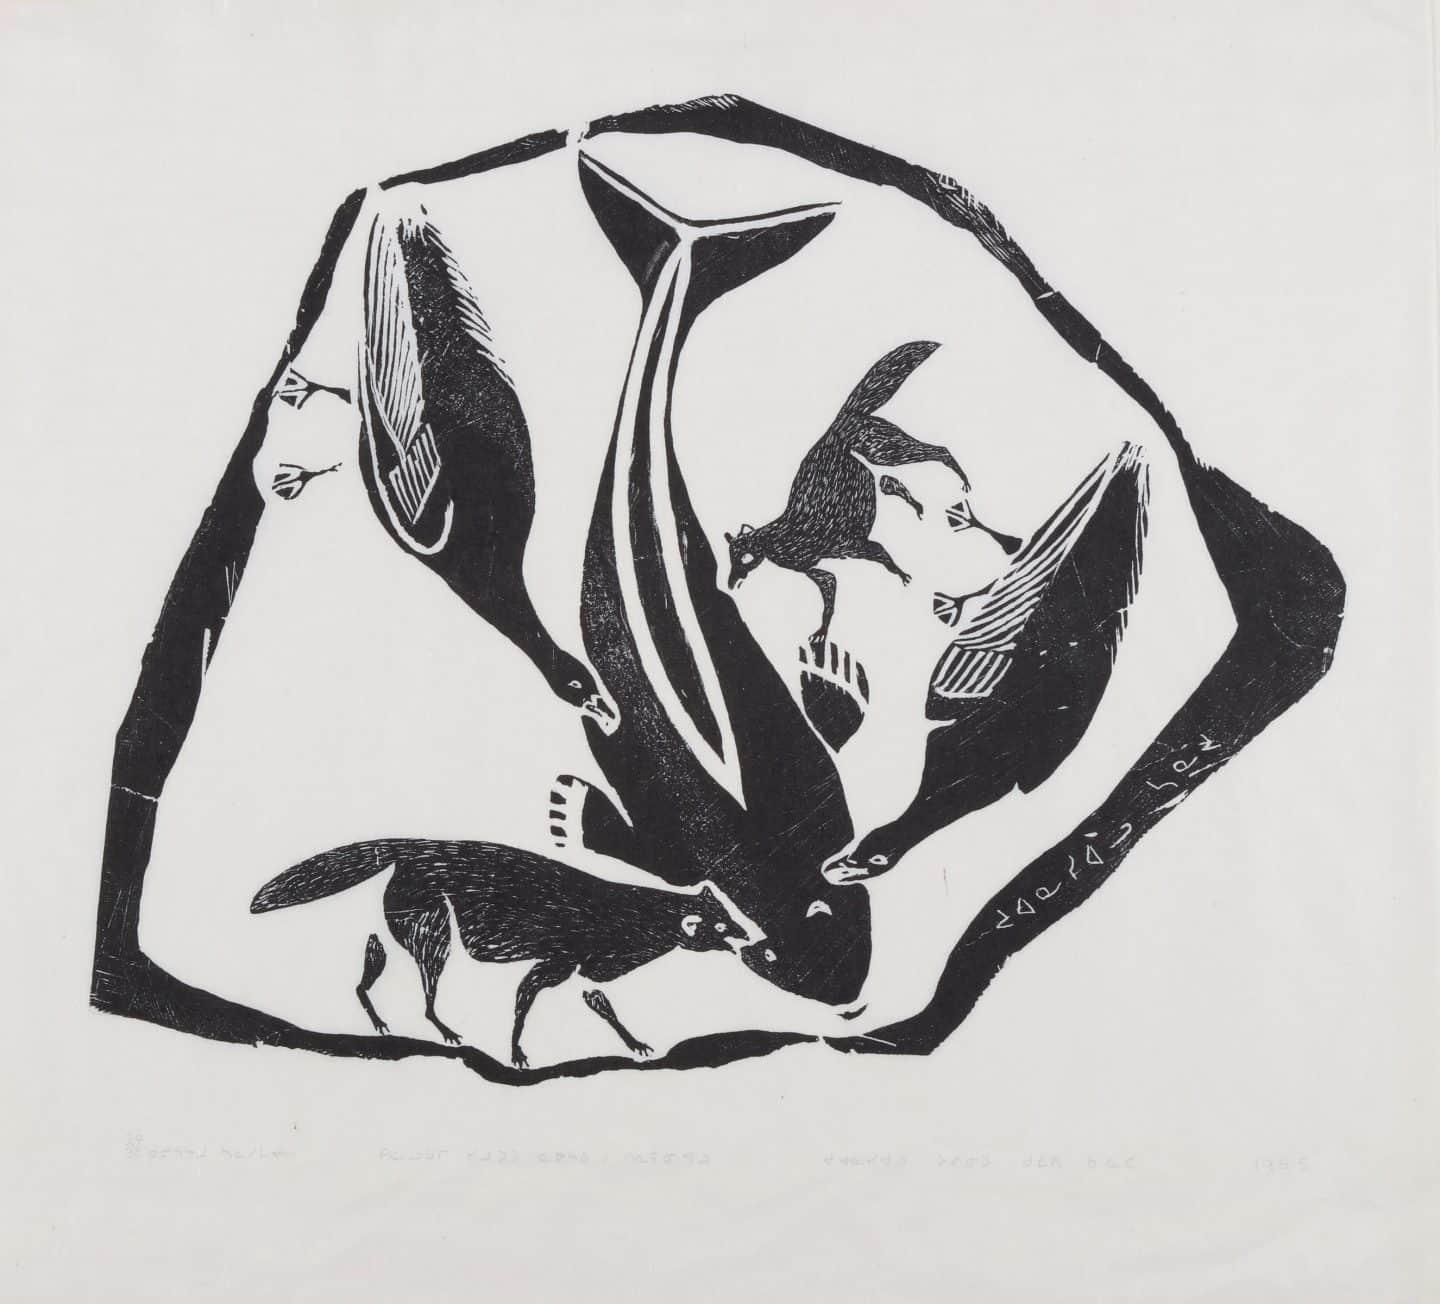 Juanisialu Irqumia, Fox and Seagulls Eating a White Whale/Beached White Whale is Rotted and the Foxes and Crows are Eating It, 1965, stonecut on paper, 29/30. Gift of Margaret McGowan, Arts ’78, 2017 (60-003.13)